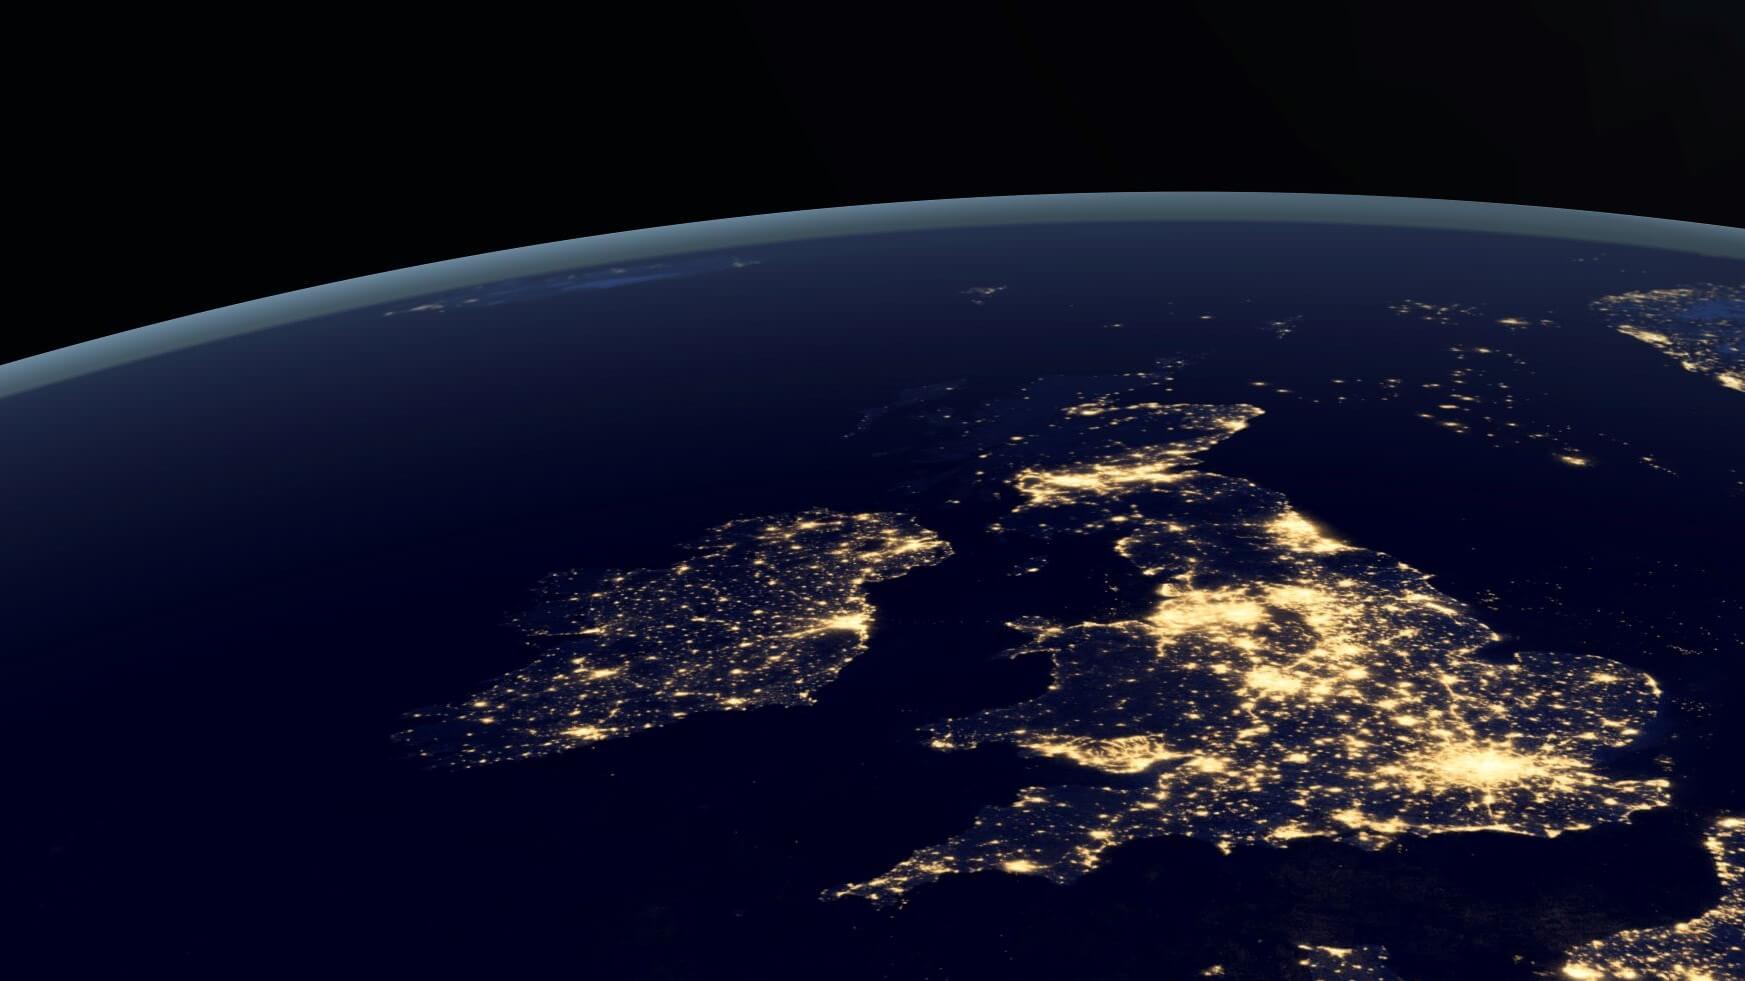 UK cities lit up at night, seen from space